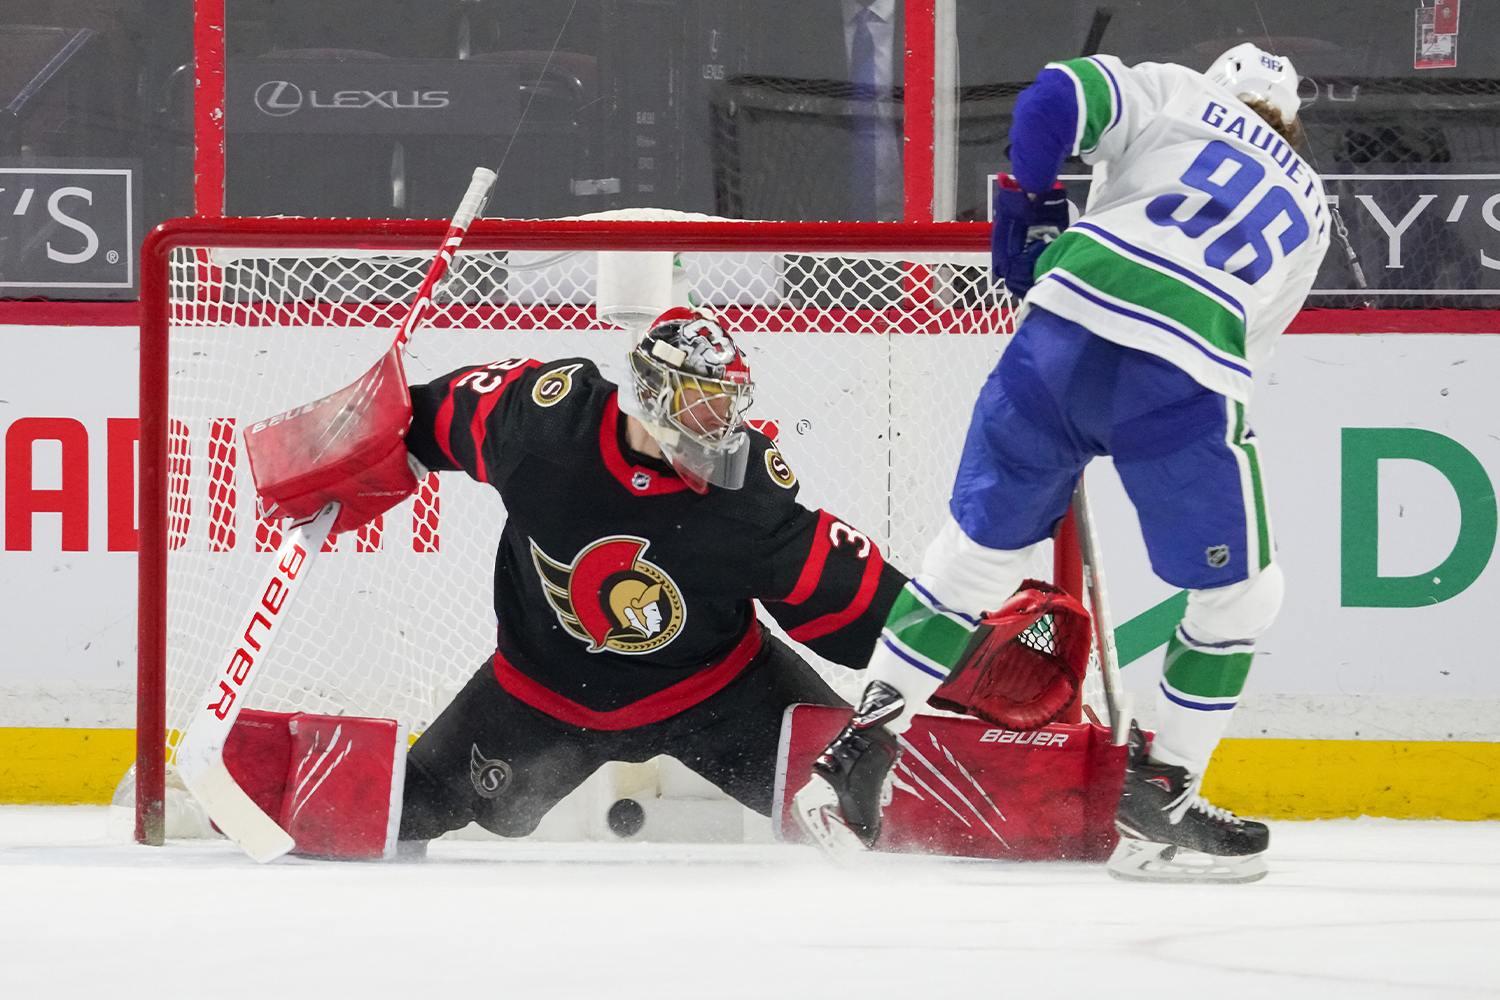 Adam Gaudette #96 of the Vancouver Canucks scores the shootout winning goal against Filip Gustavsson #32 of the Ottawa Senators at Canadian Tire Centre on March 17, 2021